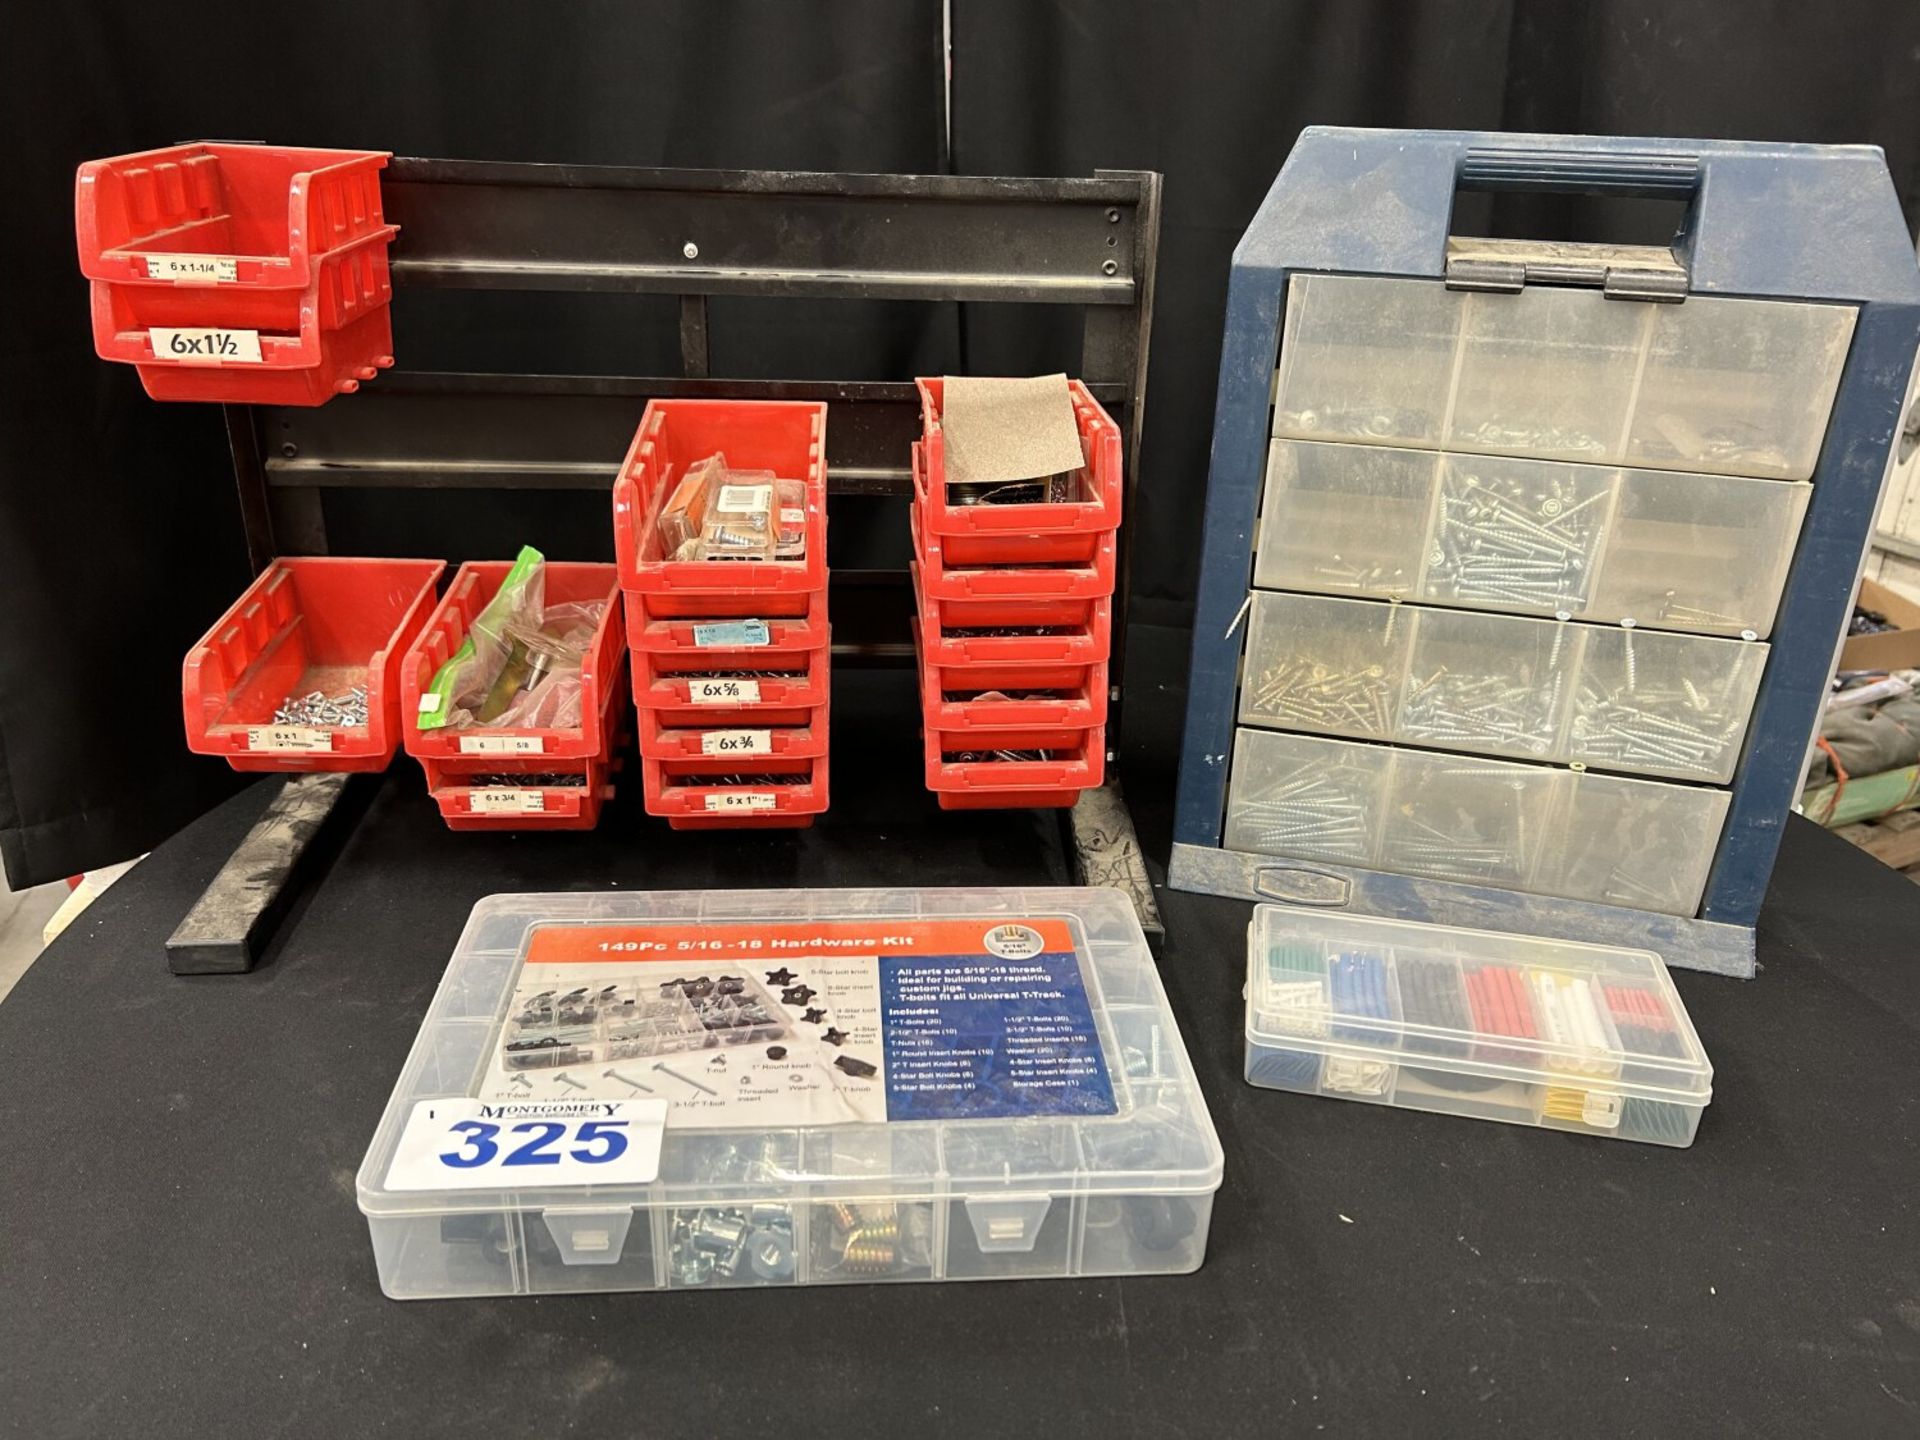 HARDWARE ASSORTMENT KIT, WIRE HEAT SHRINK WRAP, HARDWARE ASSORTMENT BINS AND CONTENTS